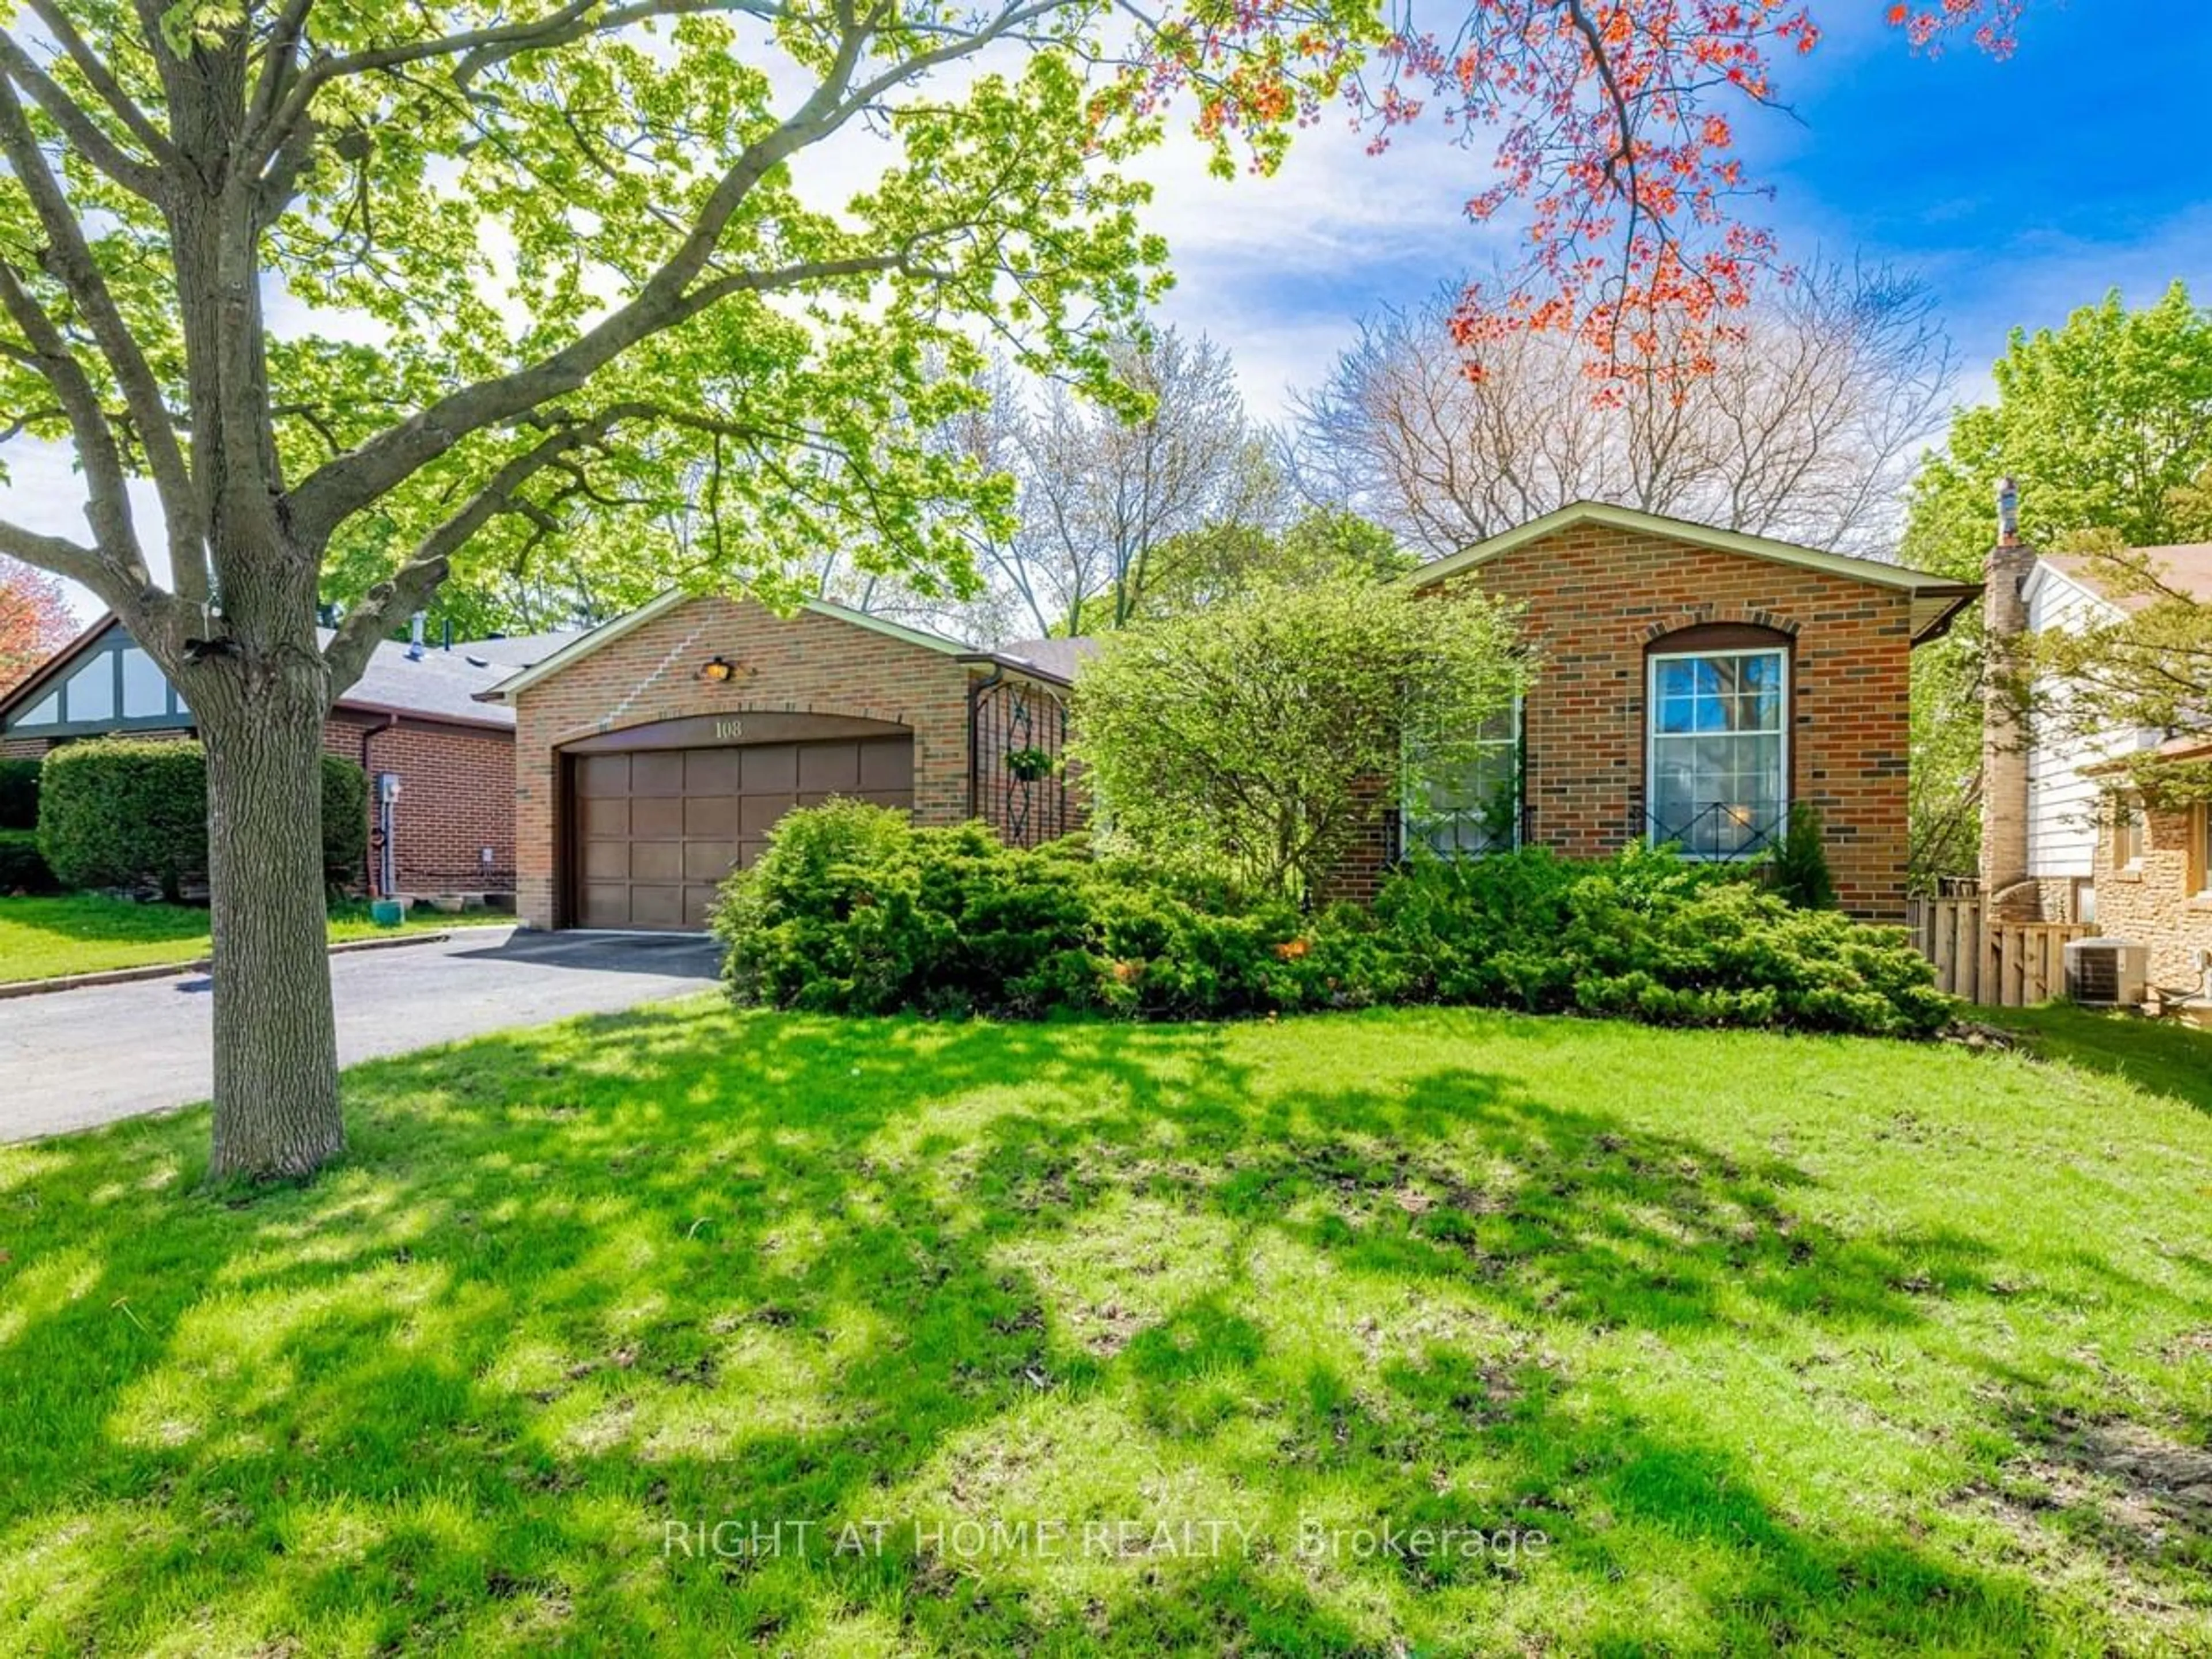 Home with brick exterior material for 108 Holsworthy Cres, Markham Ontario L3T 4K1